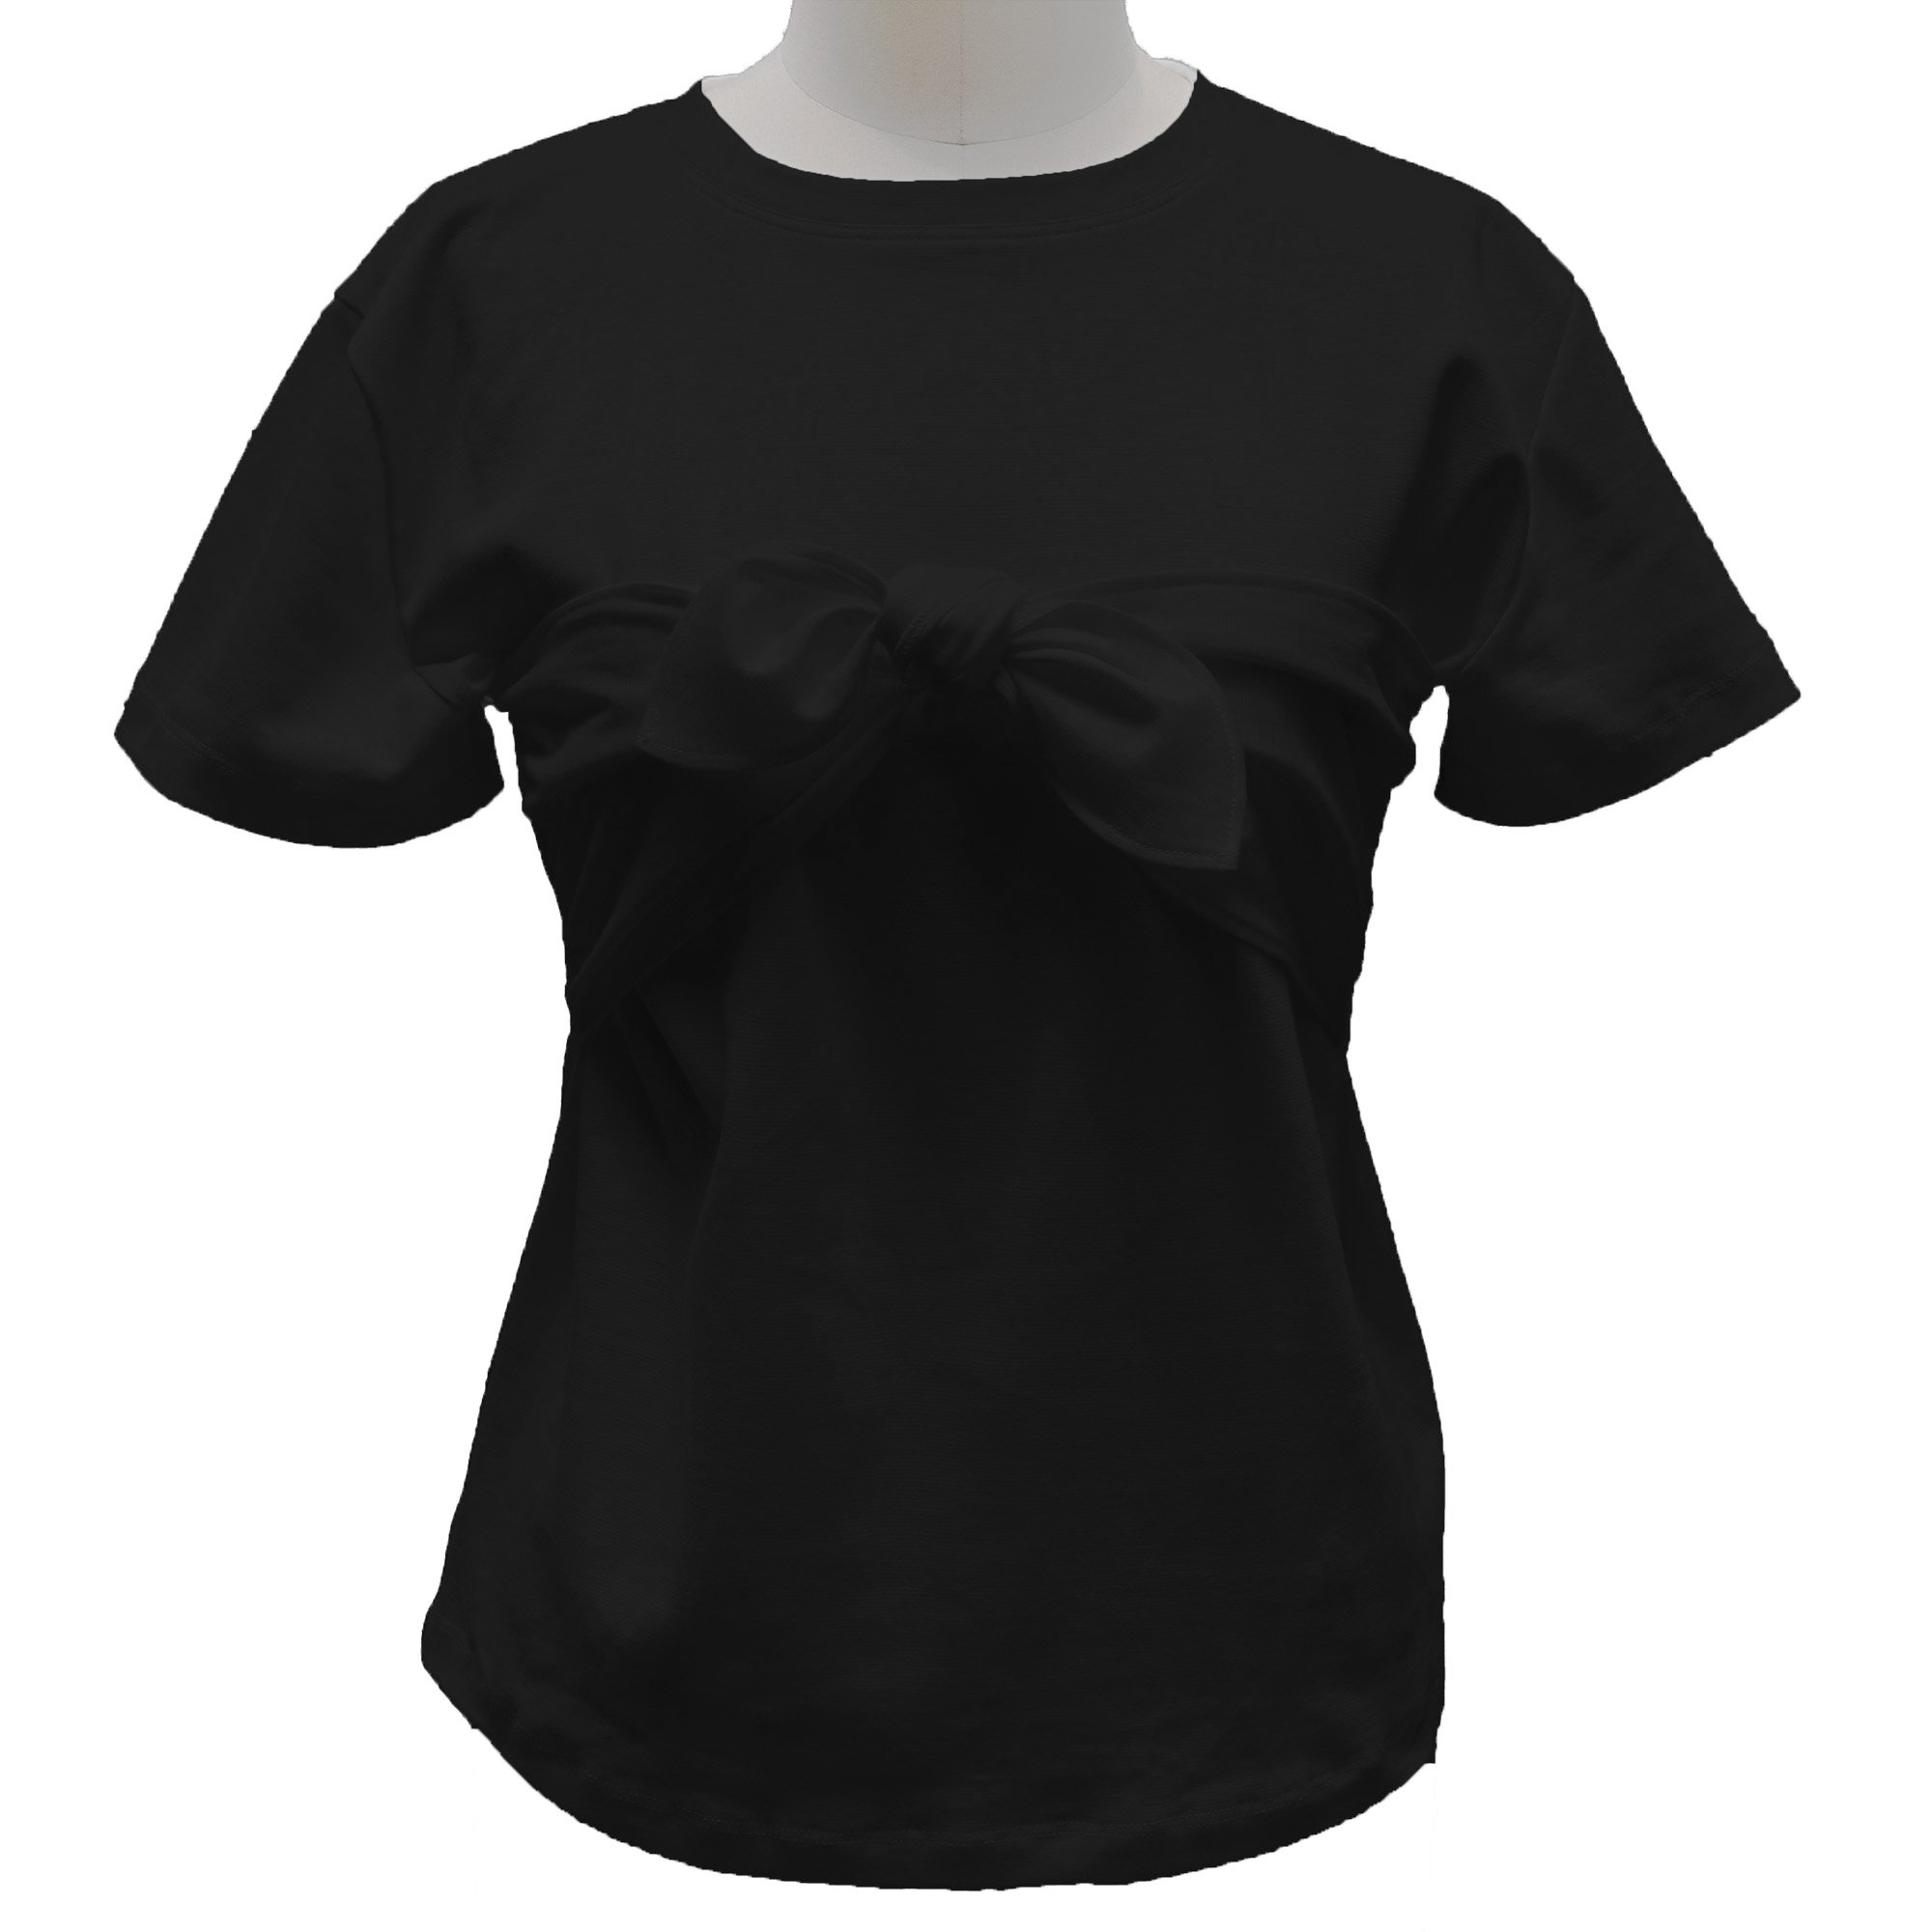 <img class='new_mark_img1' src='https://img.shop-pro.jp/img/new/icons6.gif' style='border:none;display:inline;margin:0px;padding:0px;width:auto;' />f's6 original S/S T-shirt (BLACK)